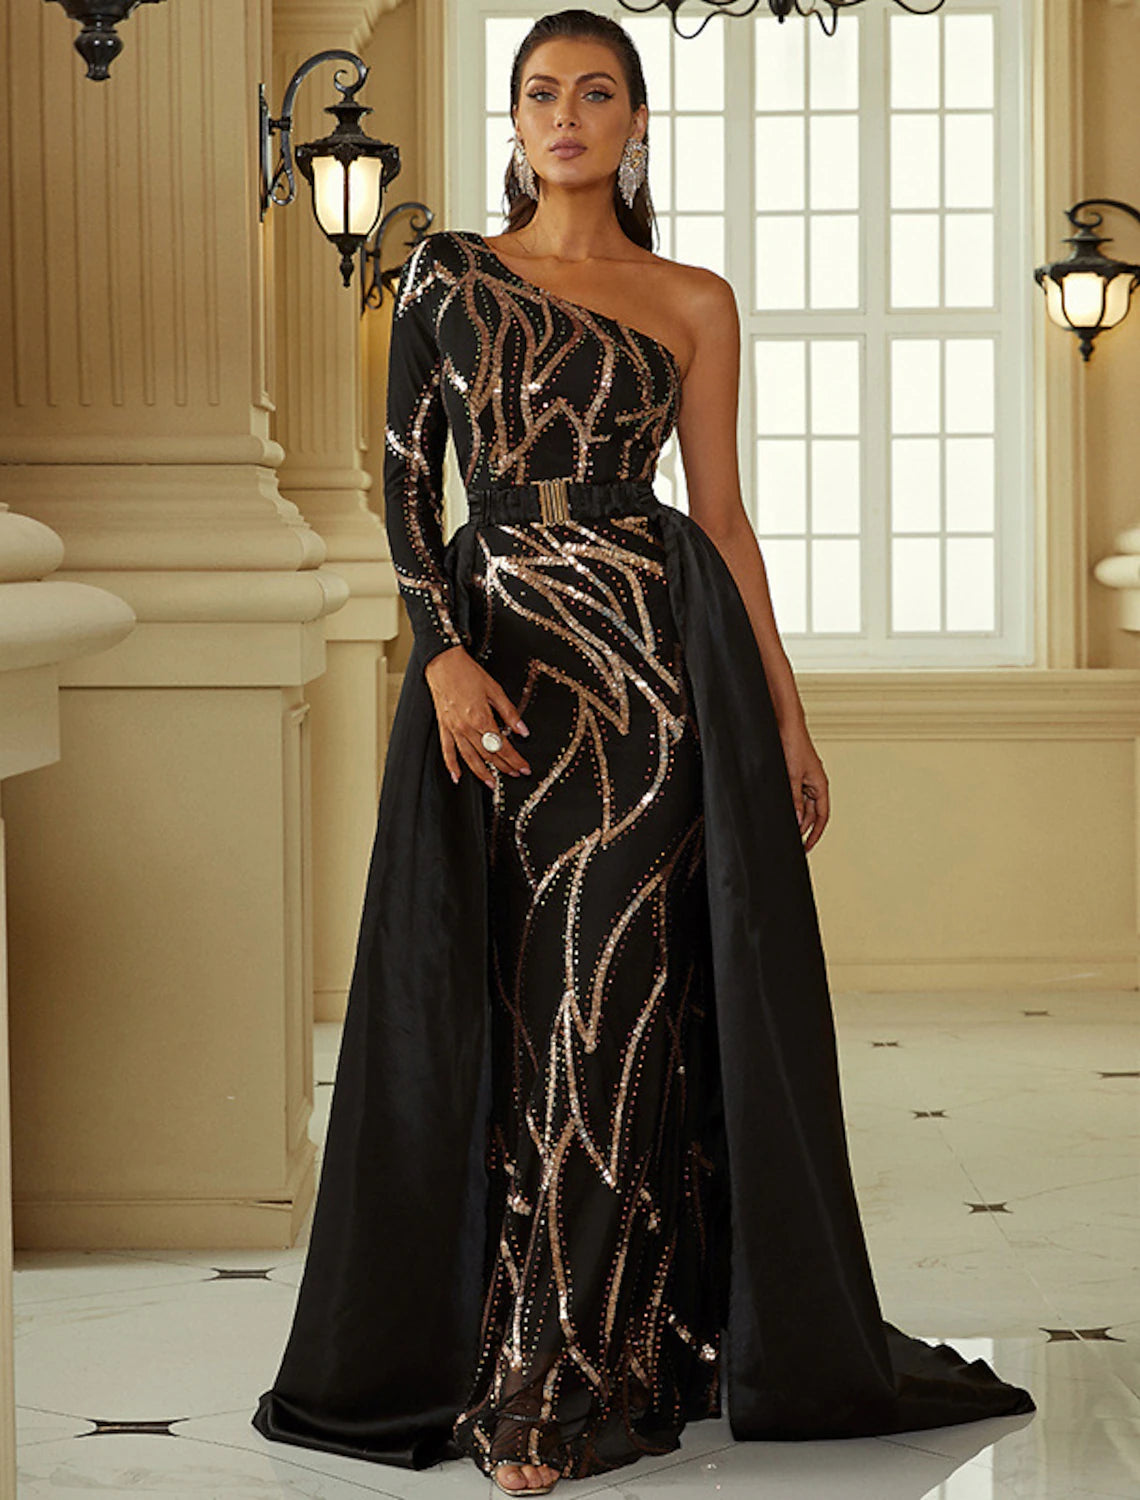 Mermaid / Trumpet Evening Gown Vintage Dress Formal Wedding Guest Court Train Long Sleeve One Shoulder Polyester with SequinMermaid / Trumpet Evening Gown Vintage Dress Formal Wedding Guest Court Train Long Sleeve One Shoulder Polyester with Sequin